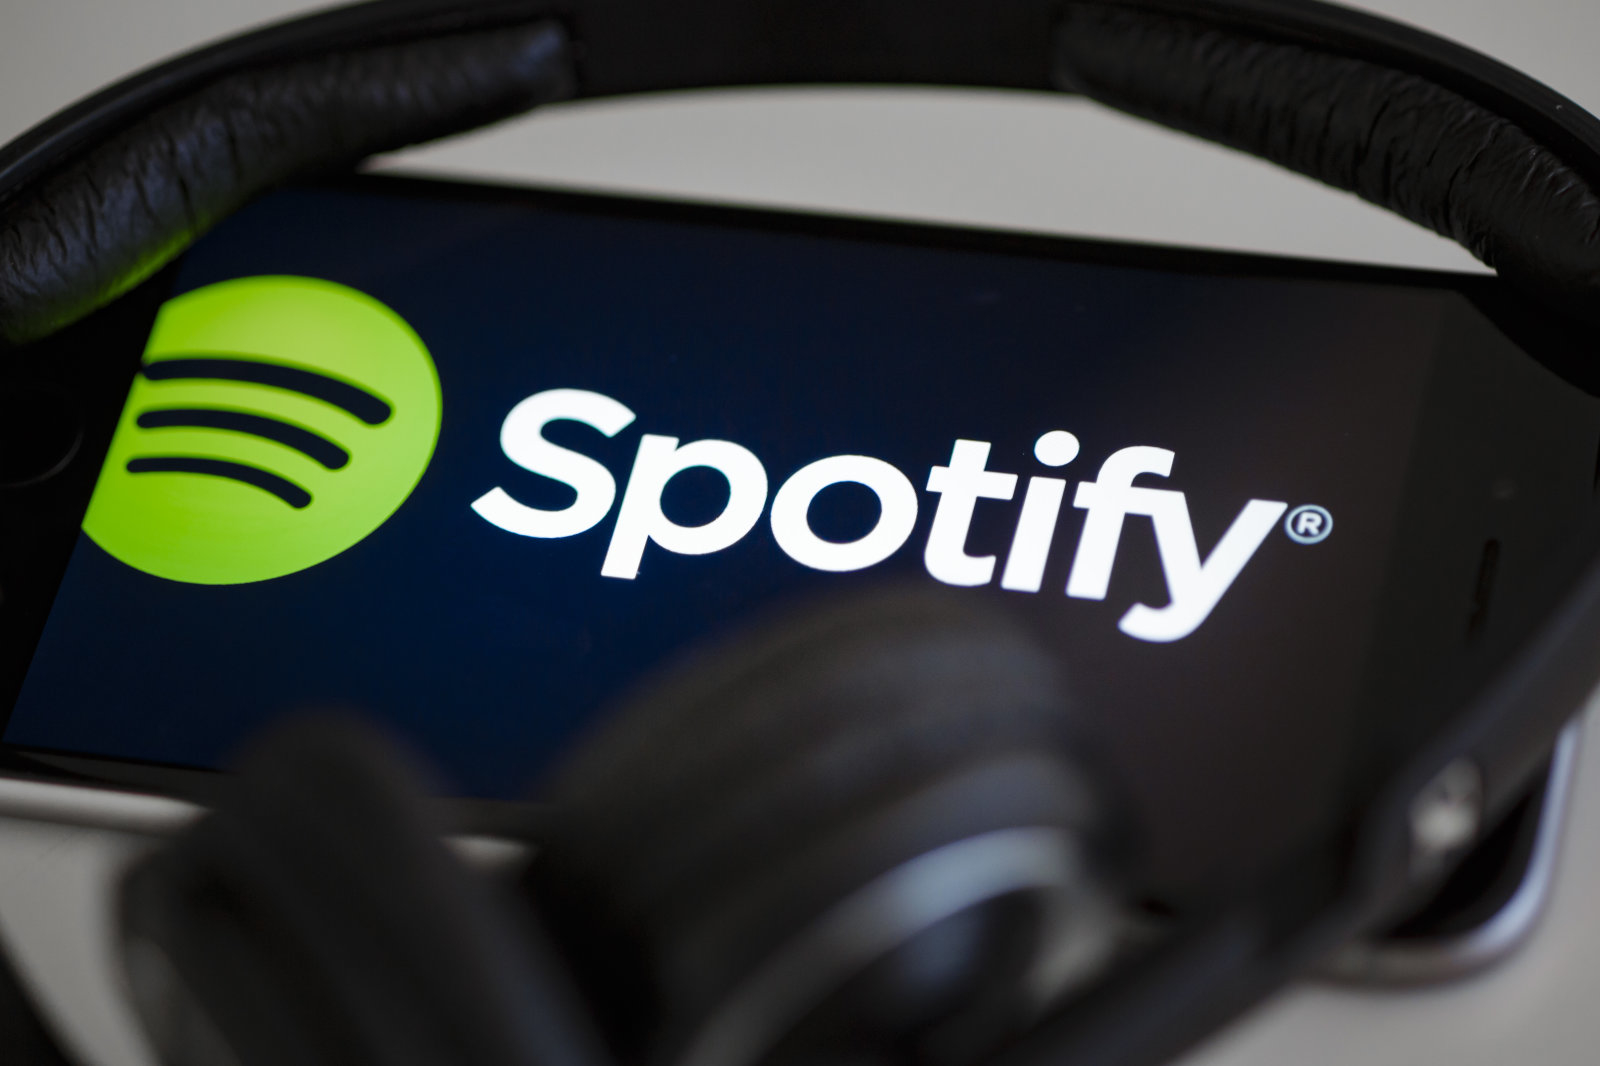 New data shows Spotify continuously on the rise among streaming services